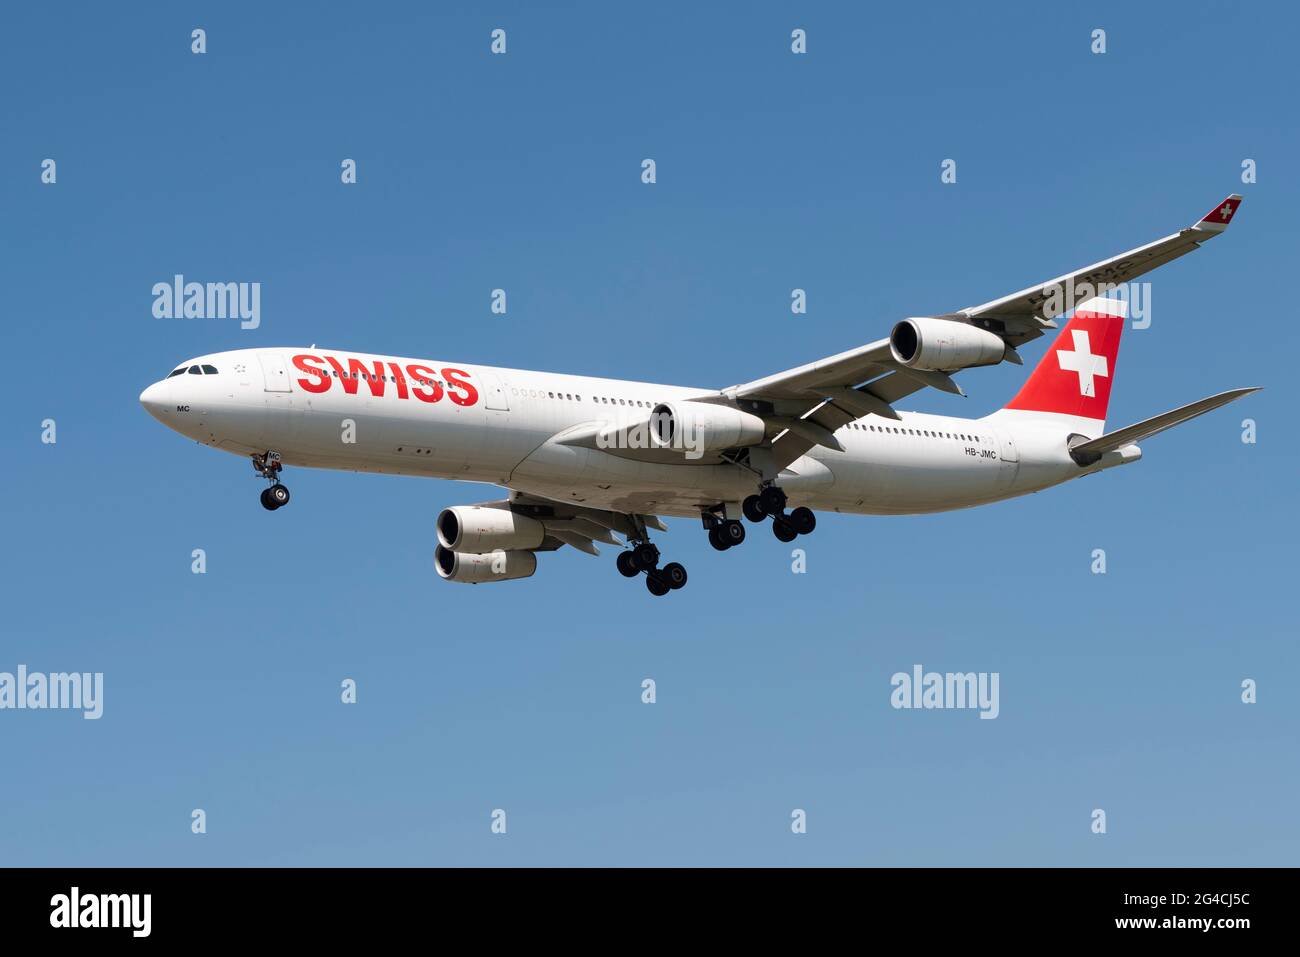 Swiss Airbus A340 airliner jet plane HB-JMC coming in on finals to land at London Heathrow Airport, UK. Swiss International Air Lines wide body plane Stock Photo